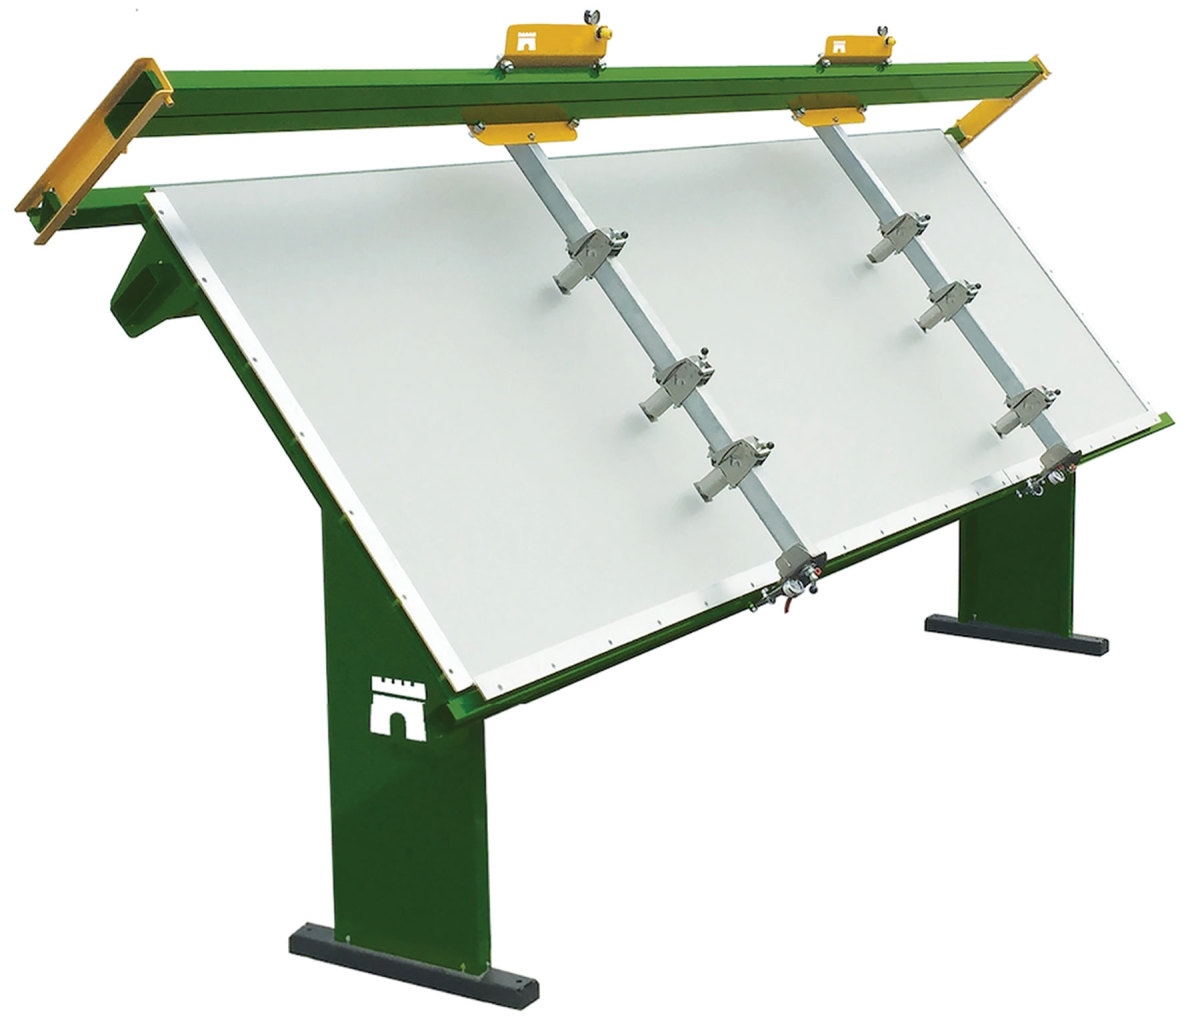 A 4’ x 12’ face frame assembly table, available from Castle USA.